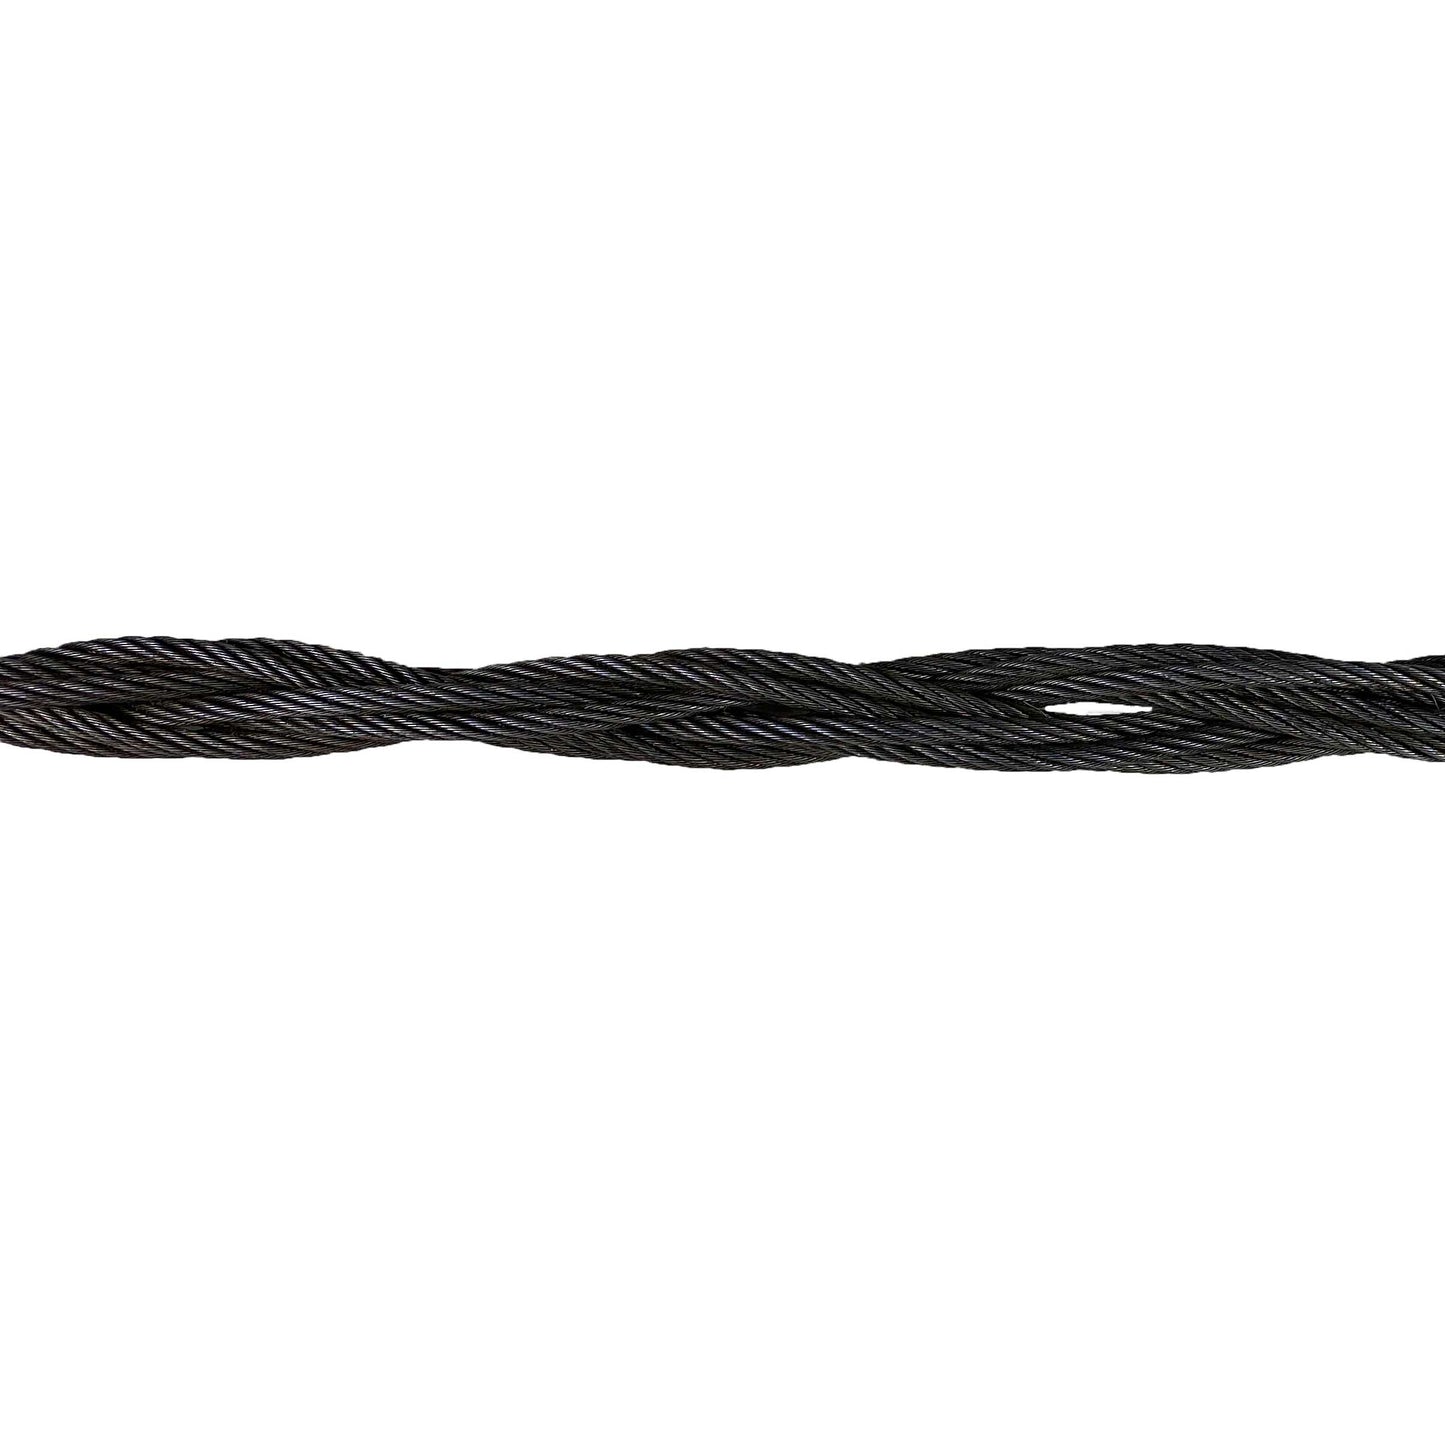 14 inch x 4 foot Eight Part Braided Wire Rope Sling image 3 of 3